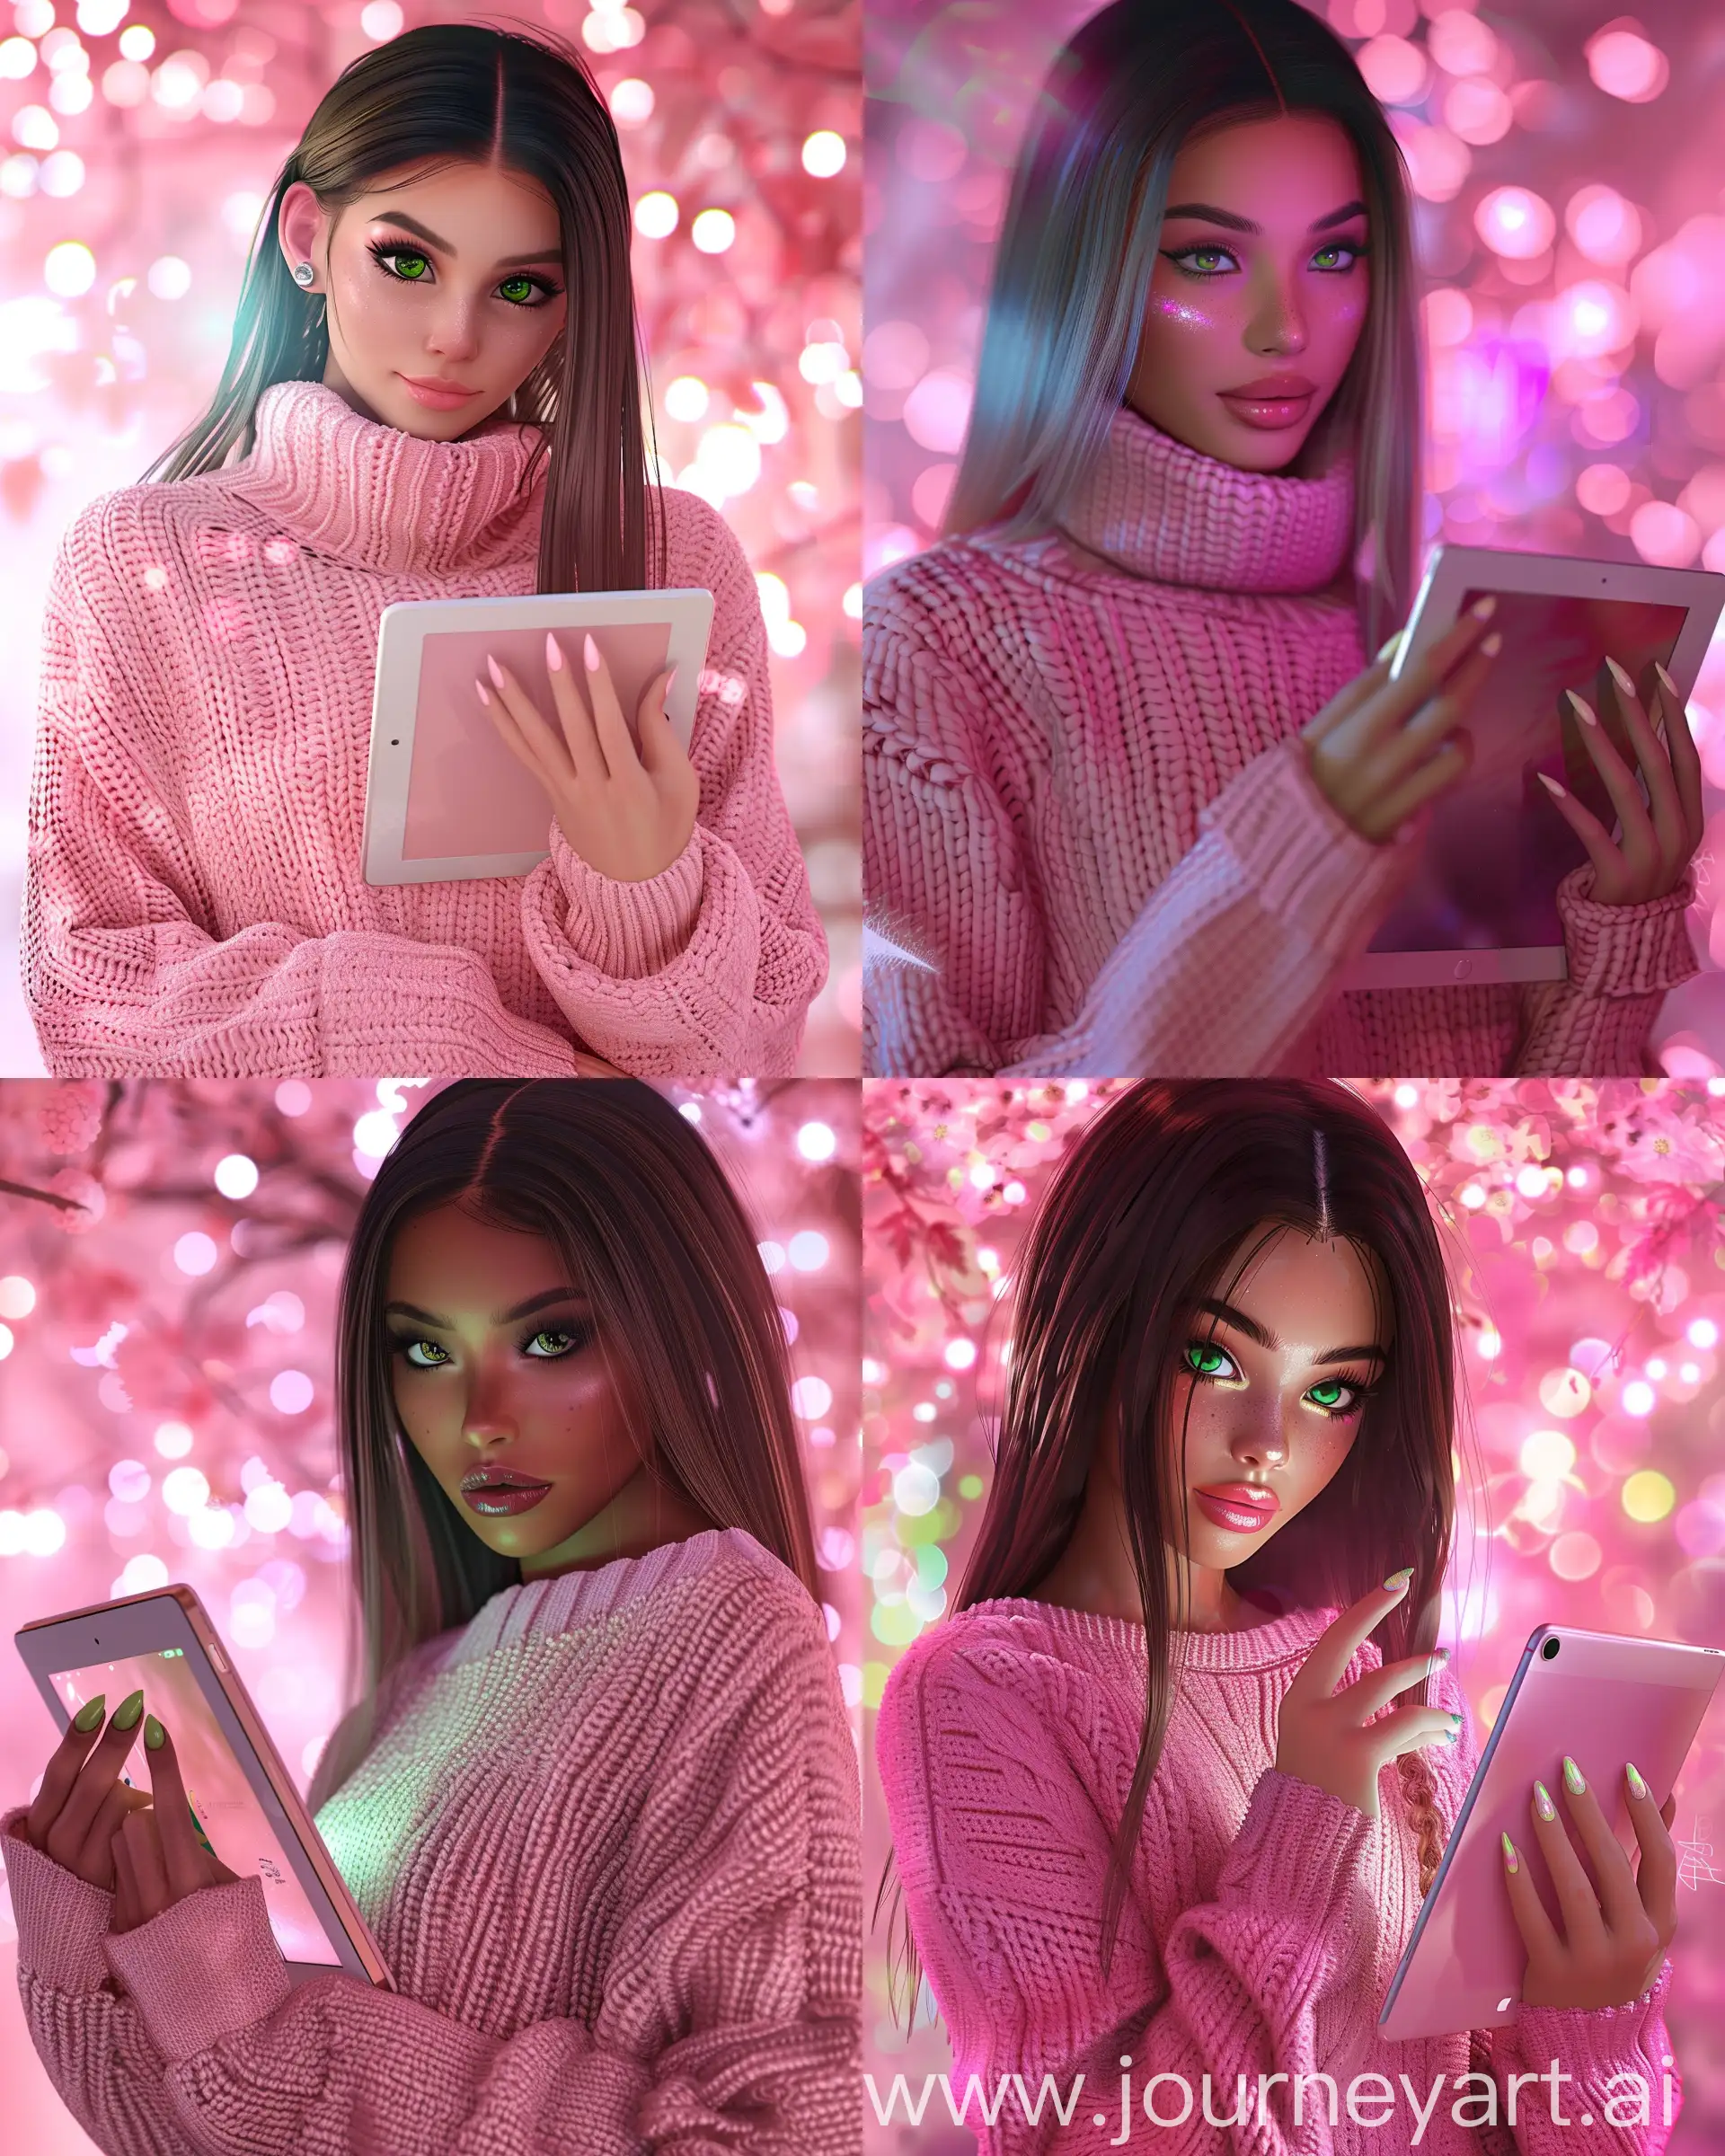 A girl with dark brown, green eyes, straight hair, in a pink sweater, holding an iPad, manicure on long nails, beautiful pink light in the background —ar 4:5